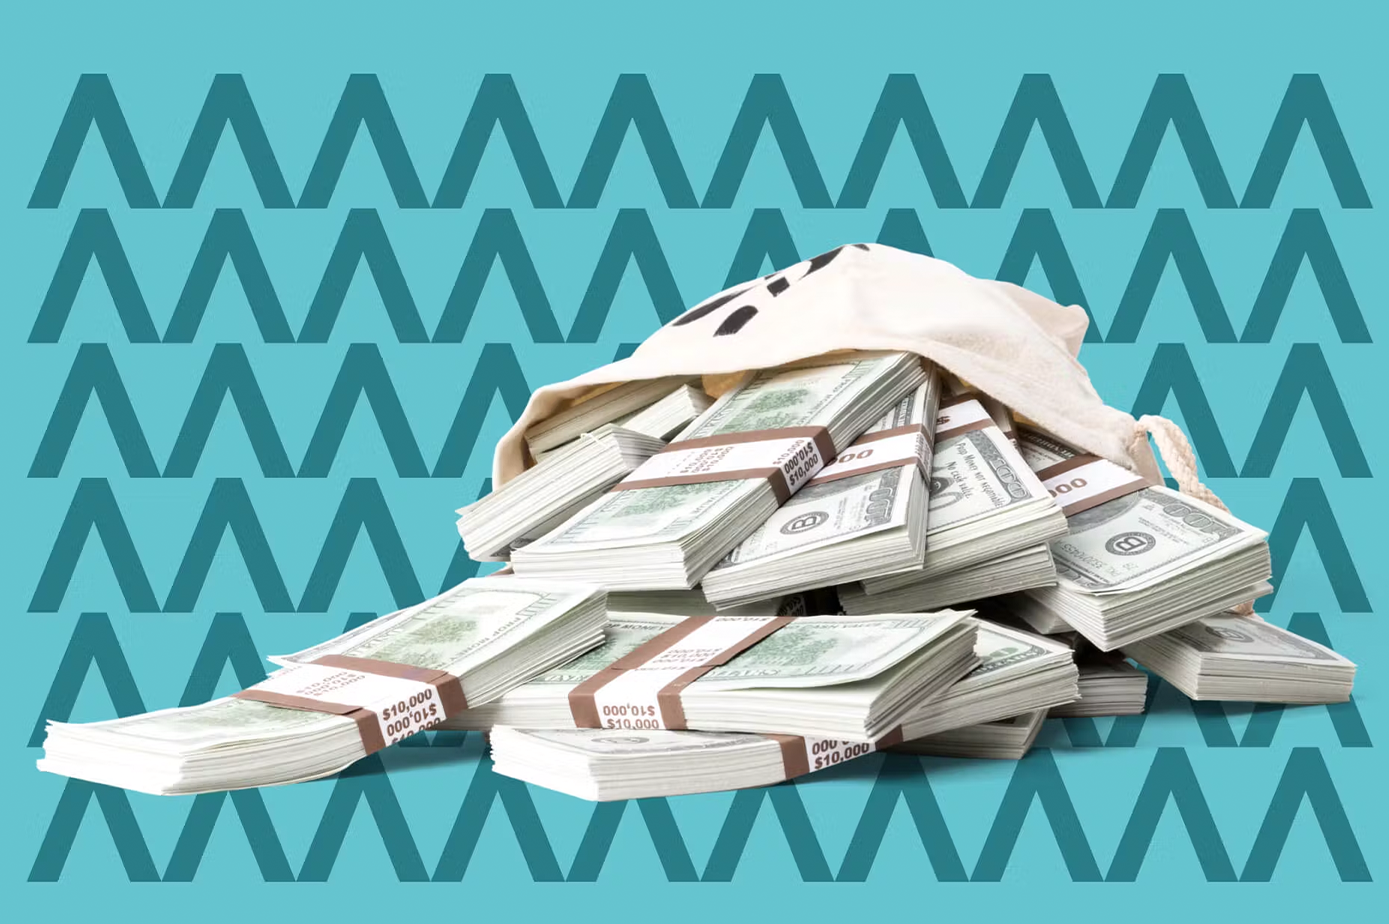 Image of a pile of banknotes